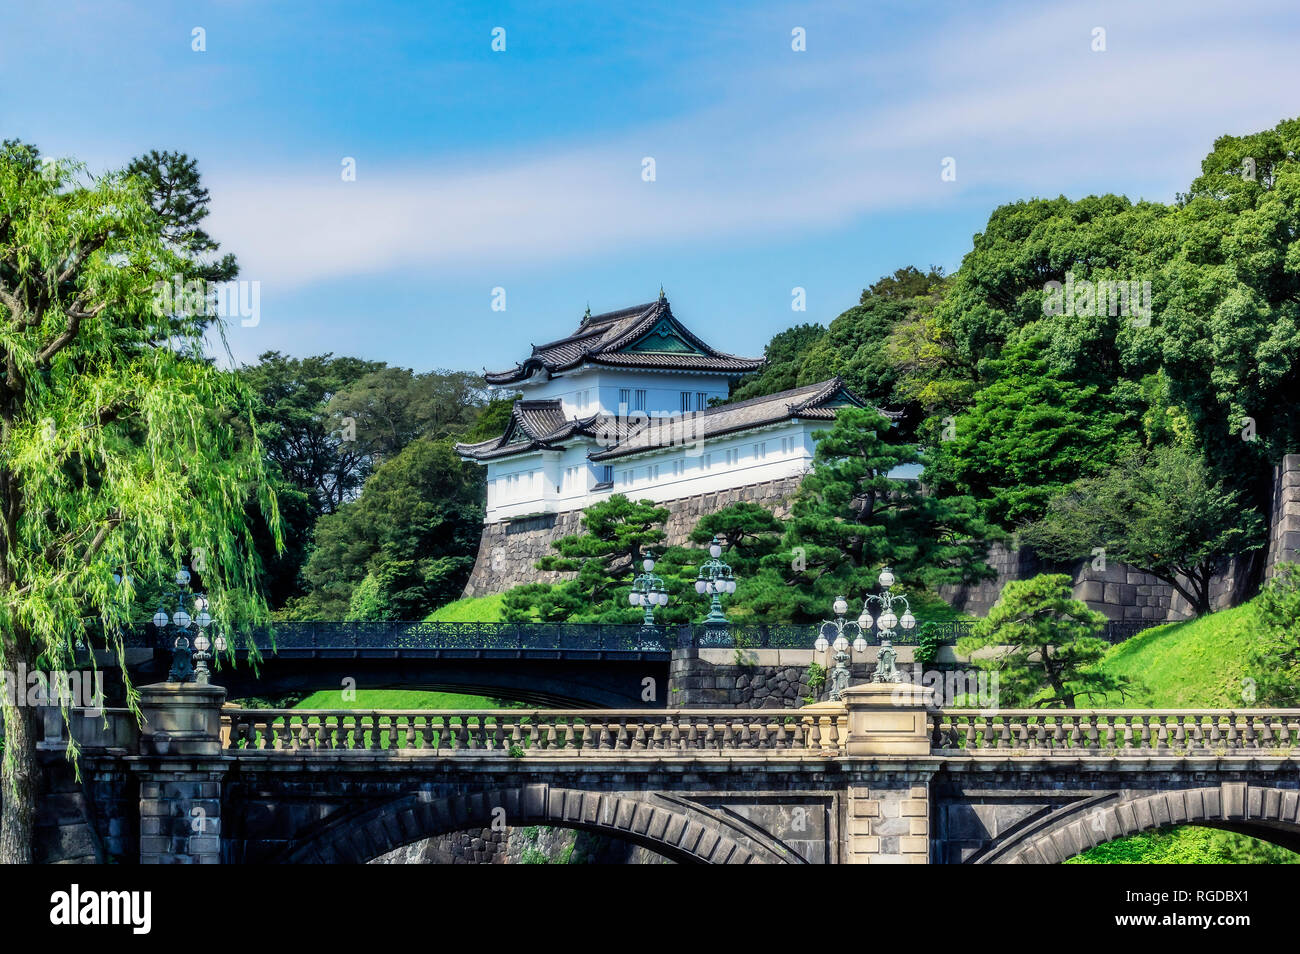 Japan, Tokyo, Chiyoda district, Imperial Palace area Stock Photo